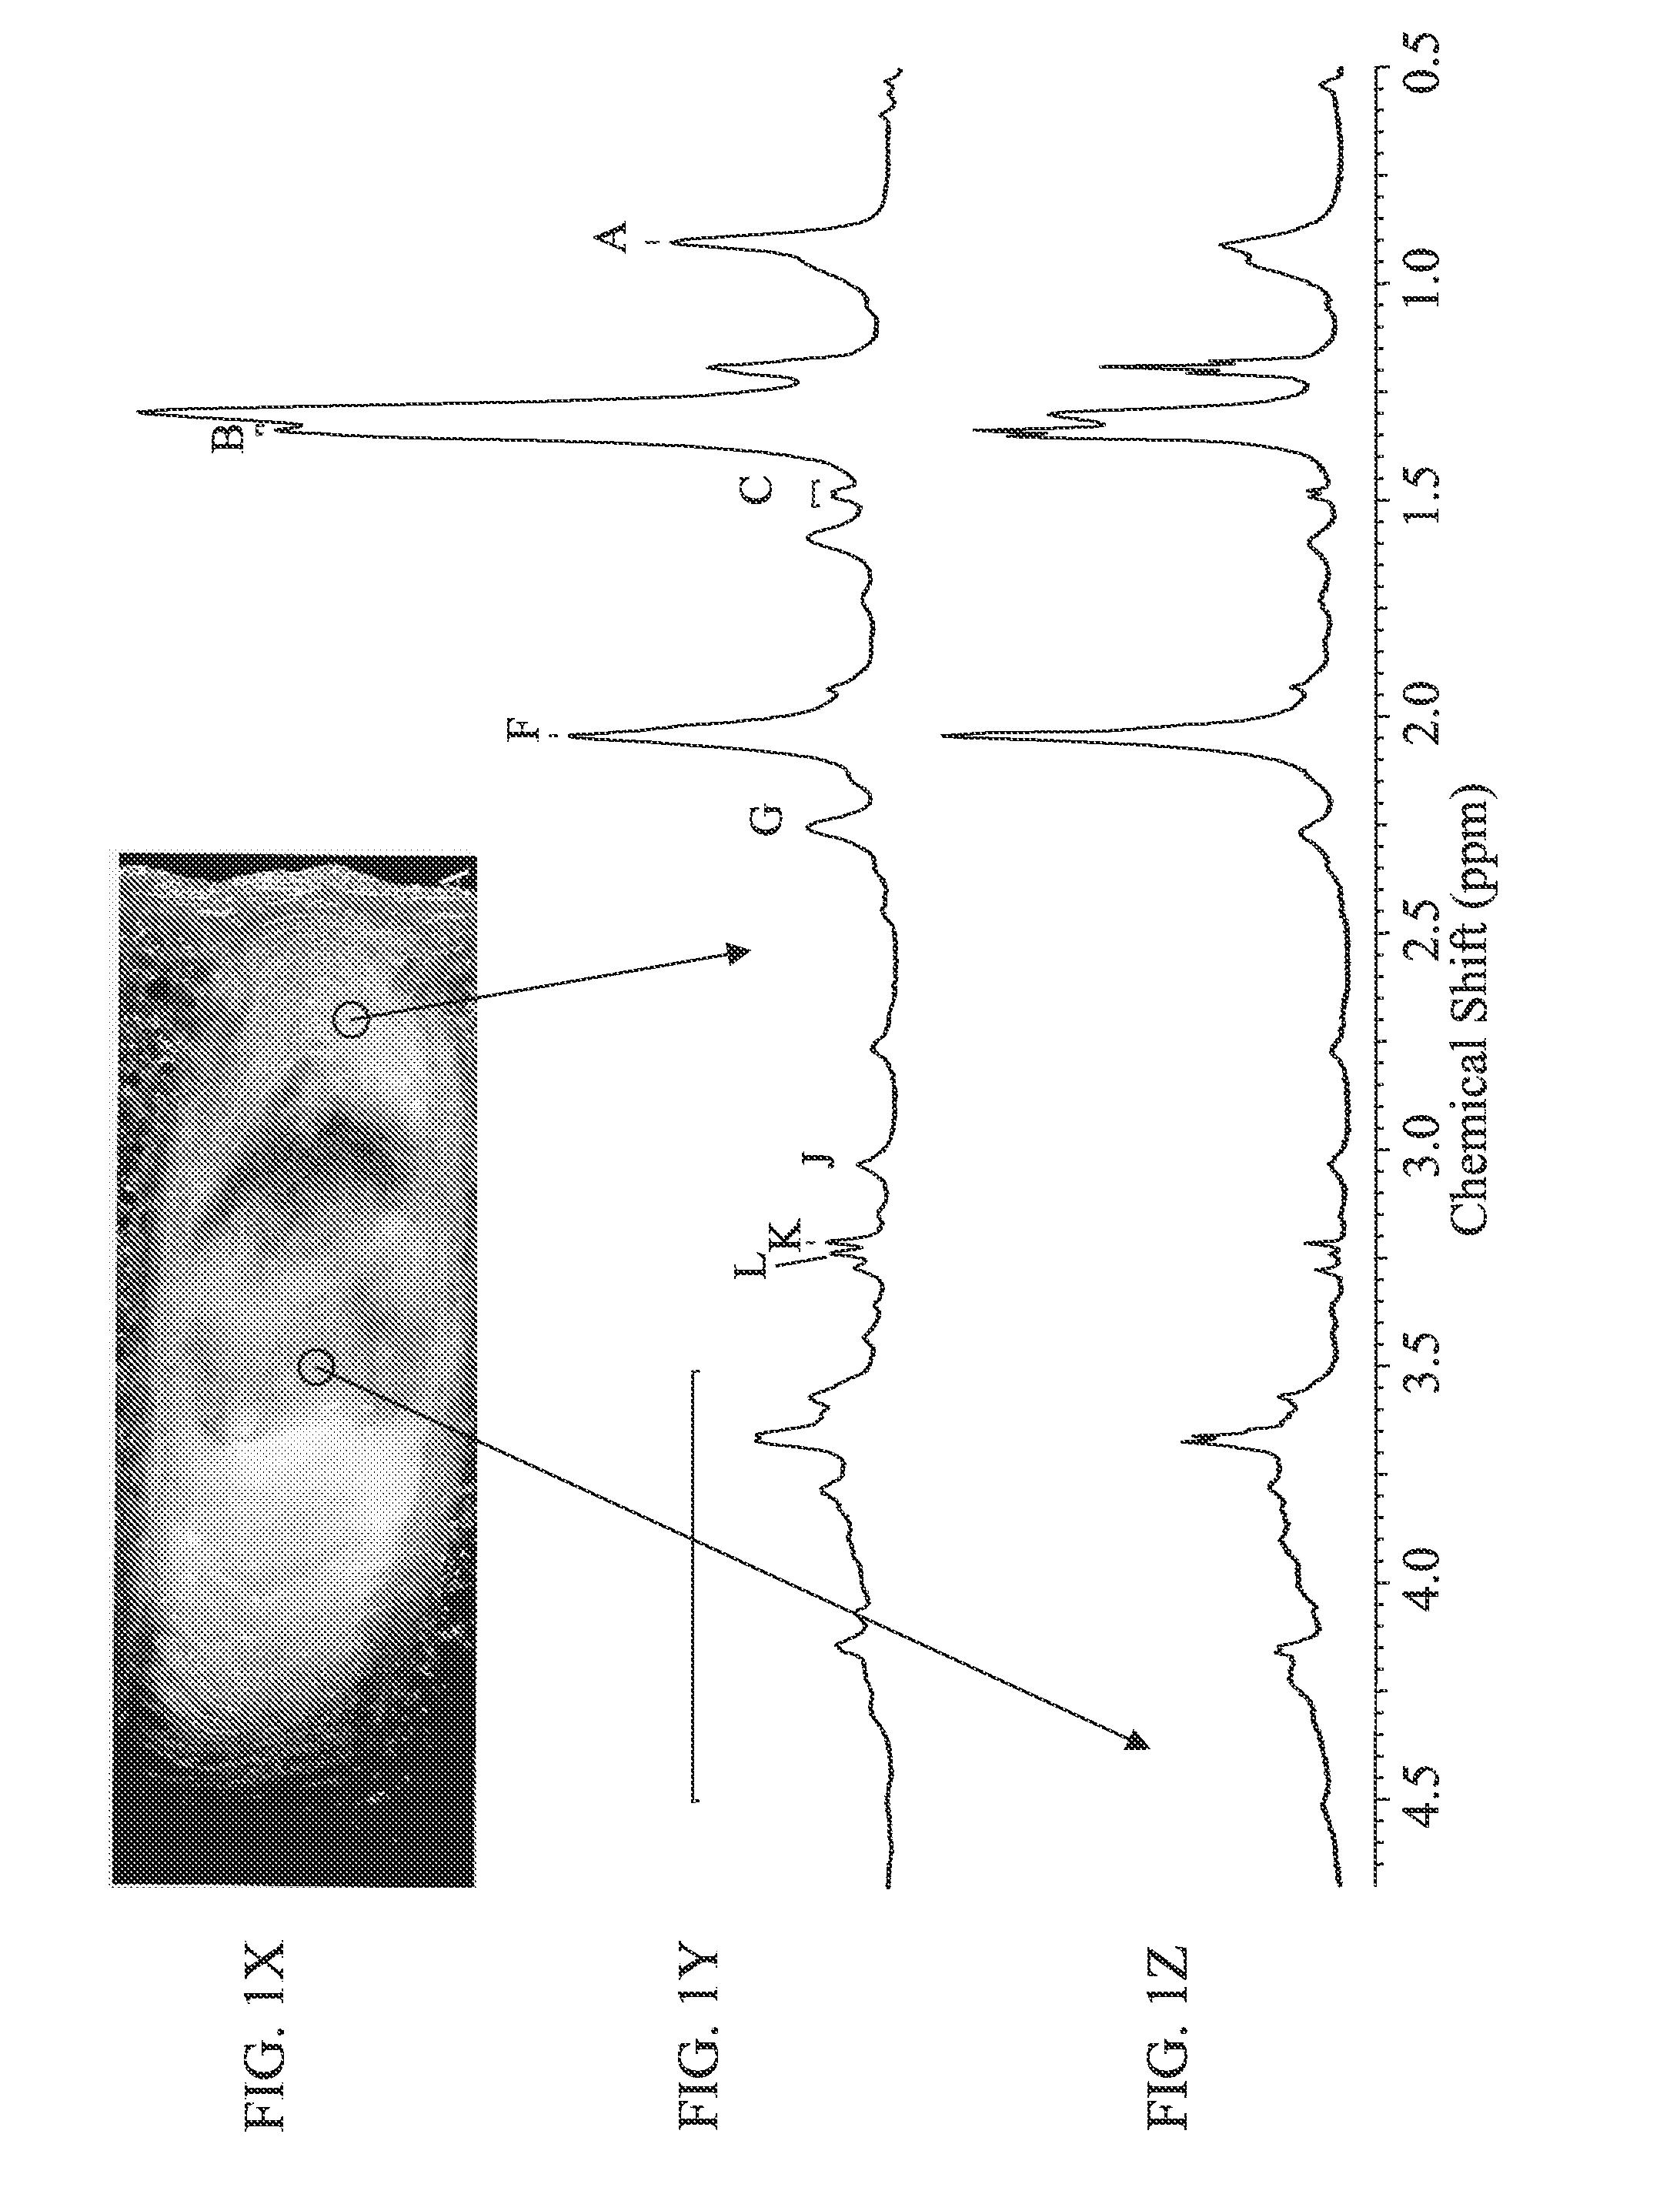 Systems and methods using nuclear magnetic resonance (NMR) spectroscopy to evaluate pain and degenerative properties of tissue